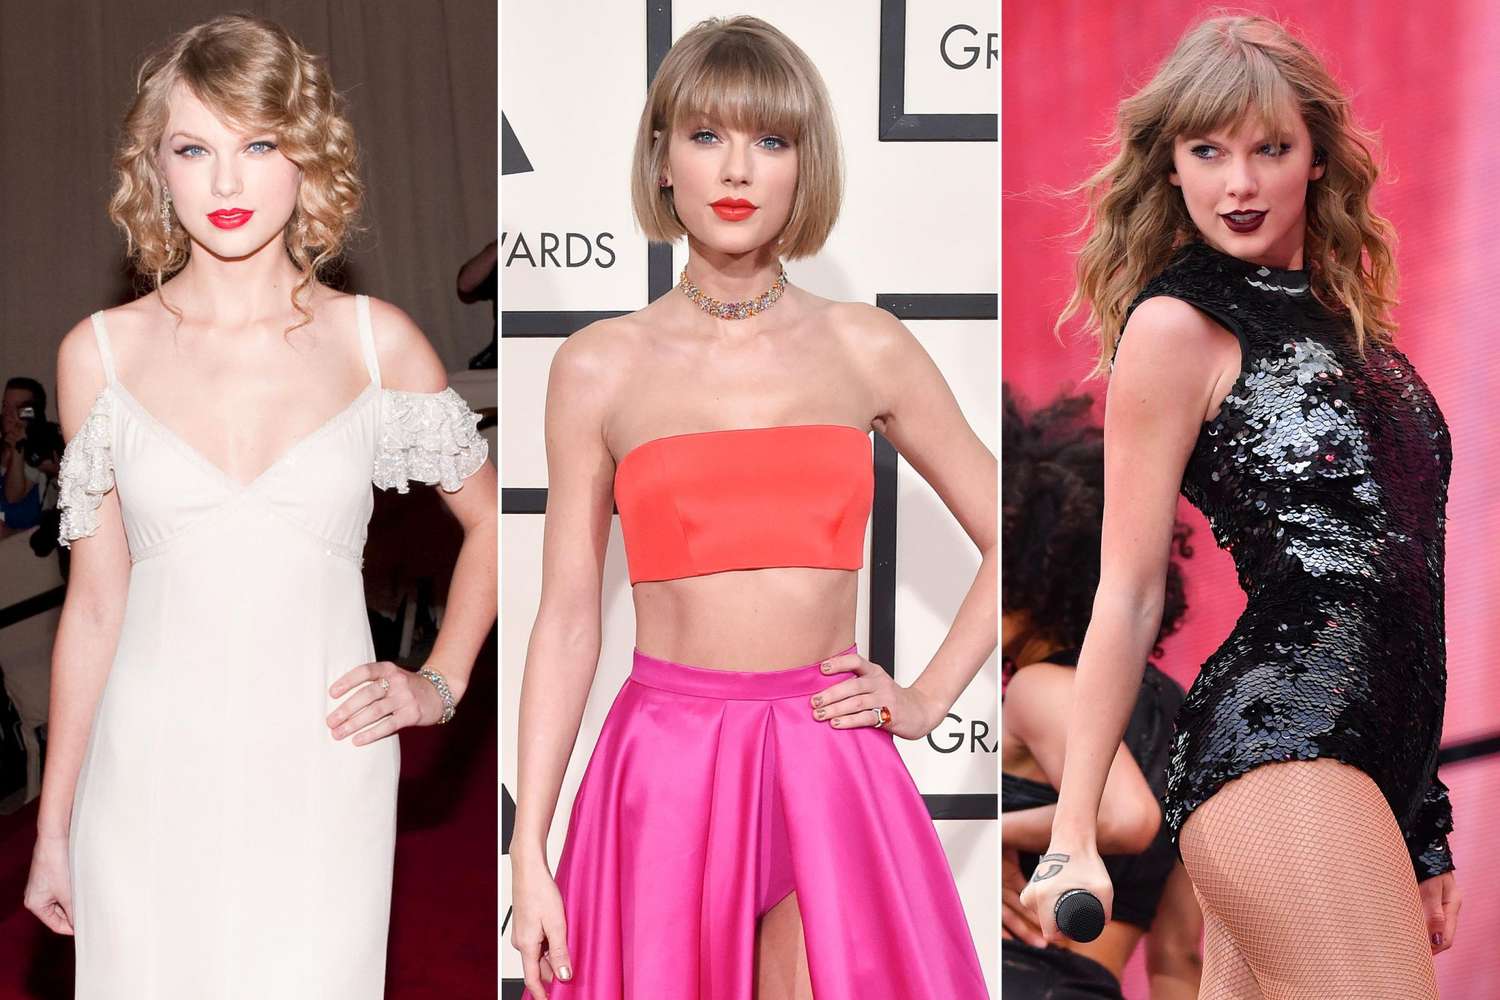 Taylor Swift’s Style Evolution: A Look Back At Her Iconic Fashion Moments